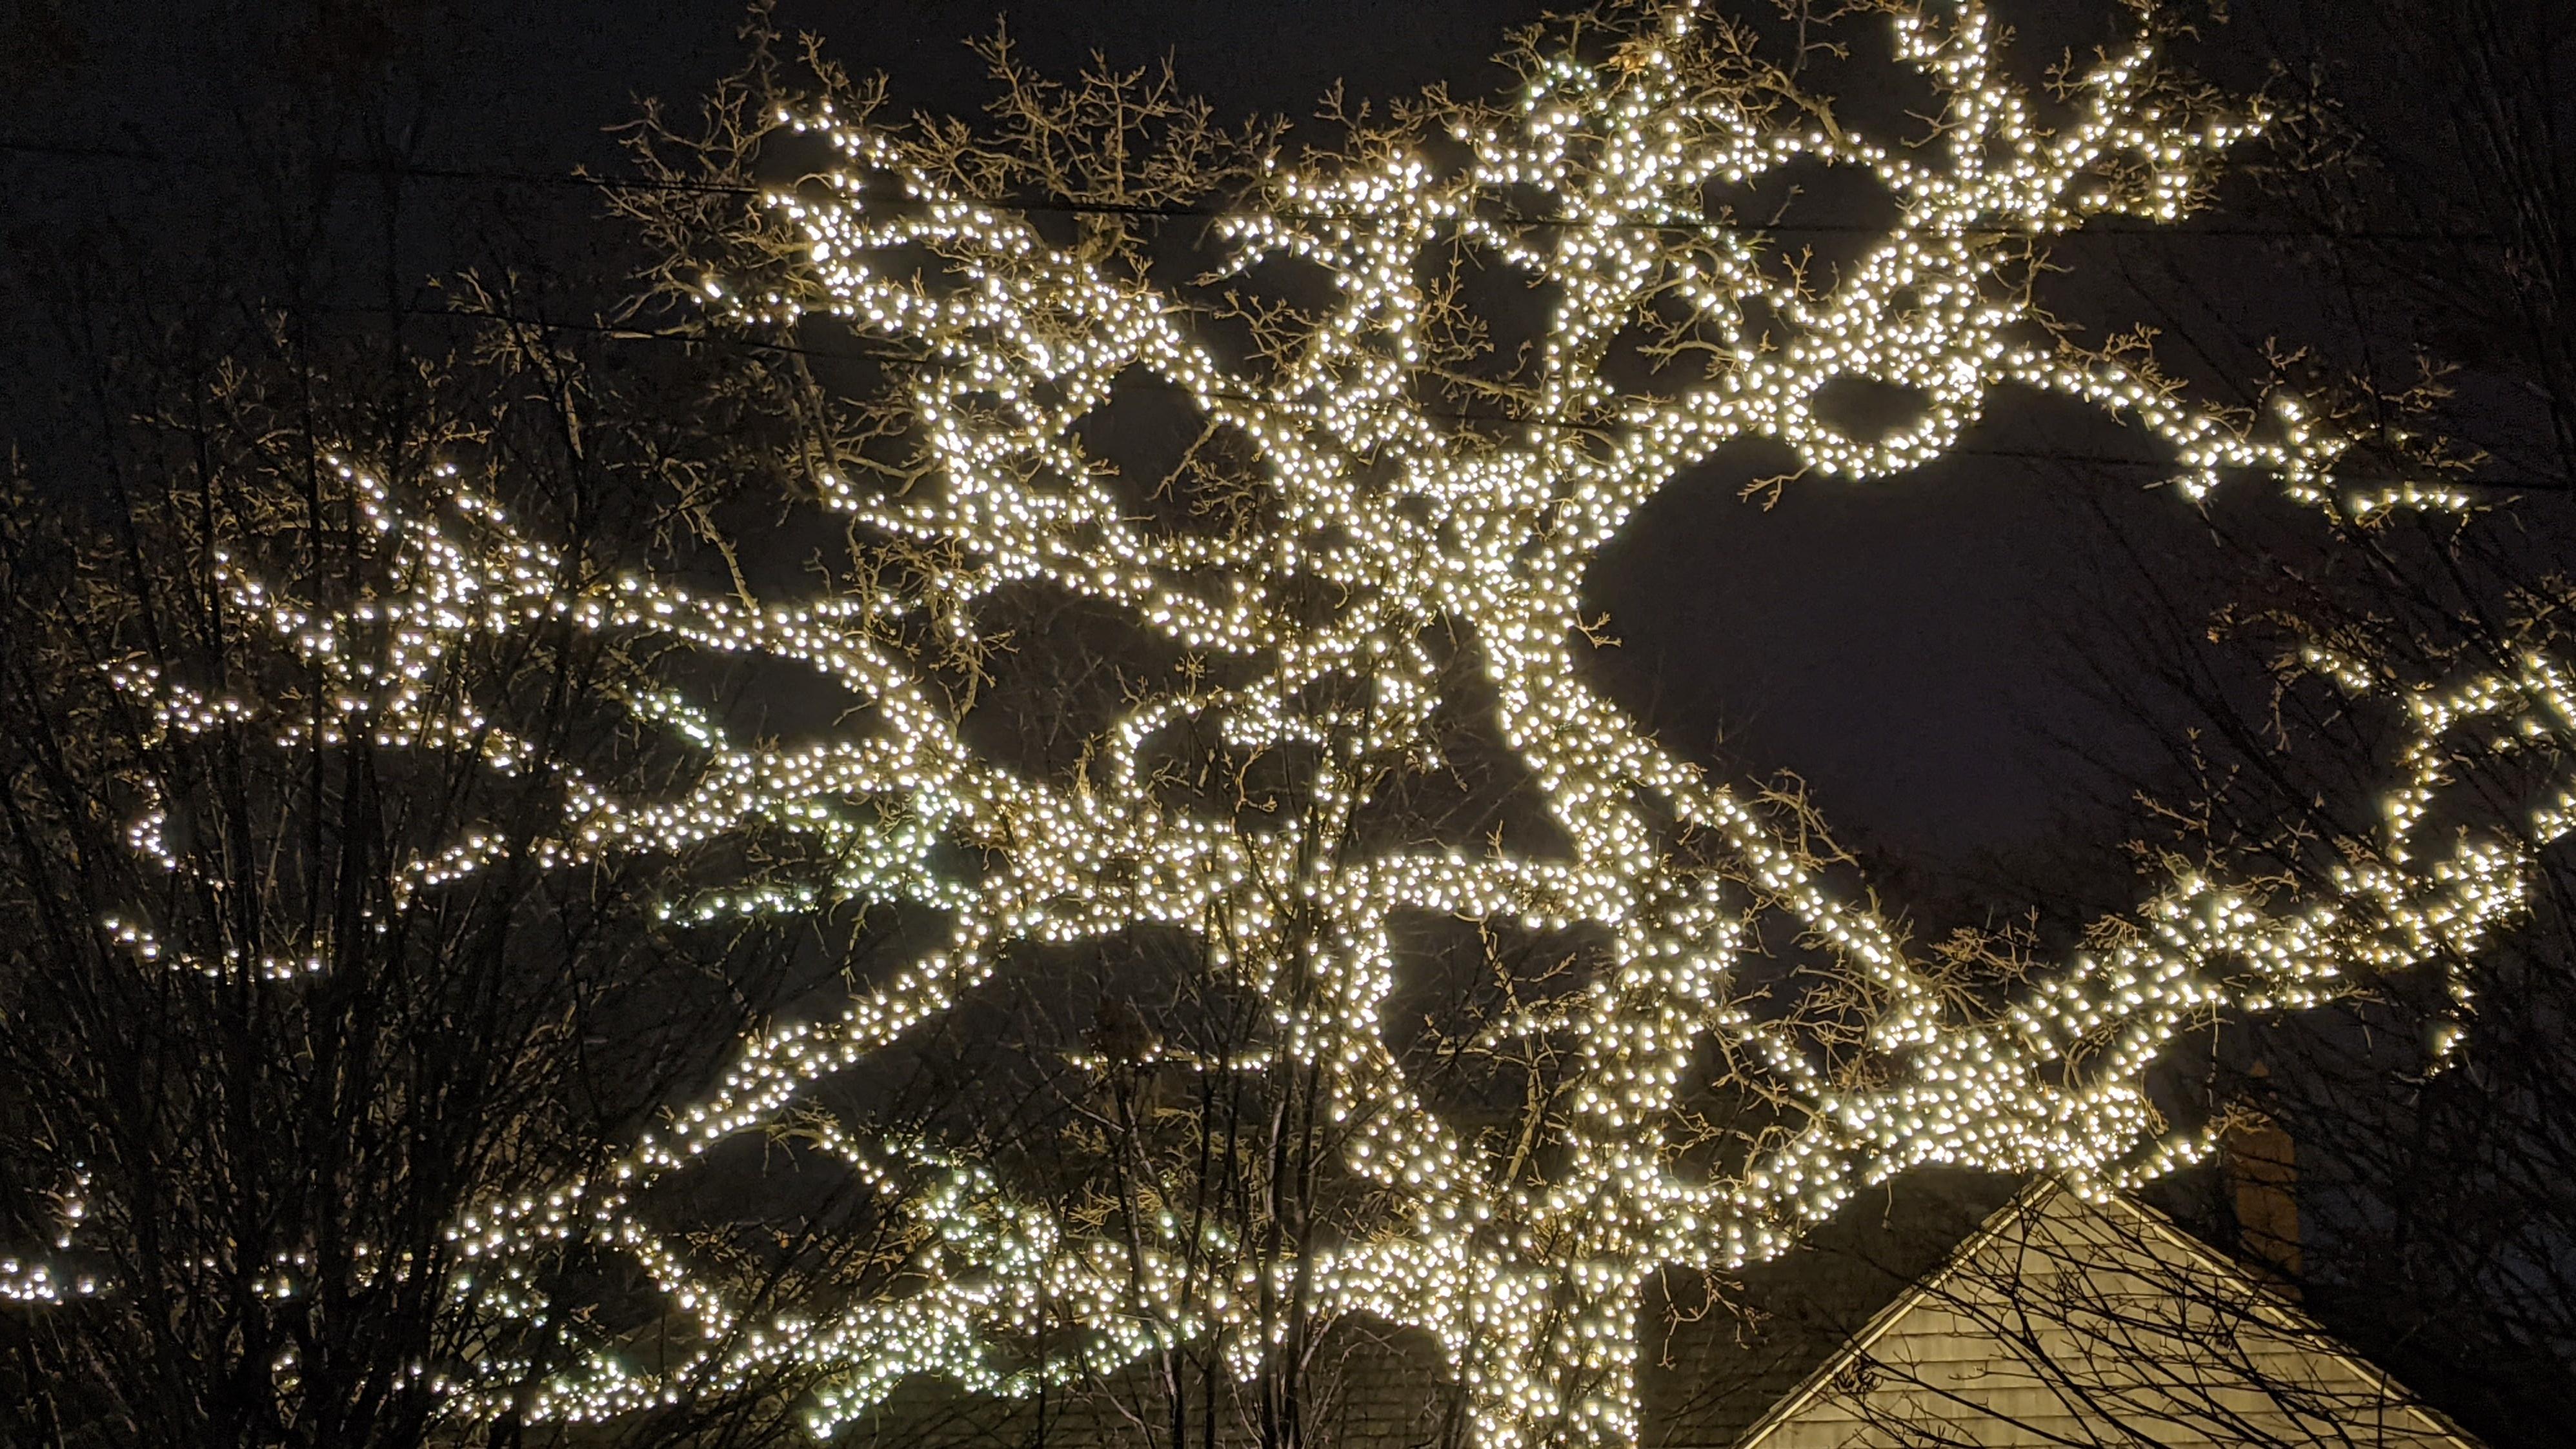 A photograph of a tree lit by thousands of white holiday lights against the night sky.